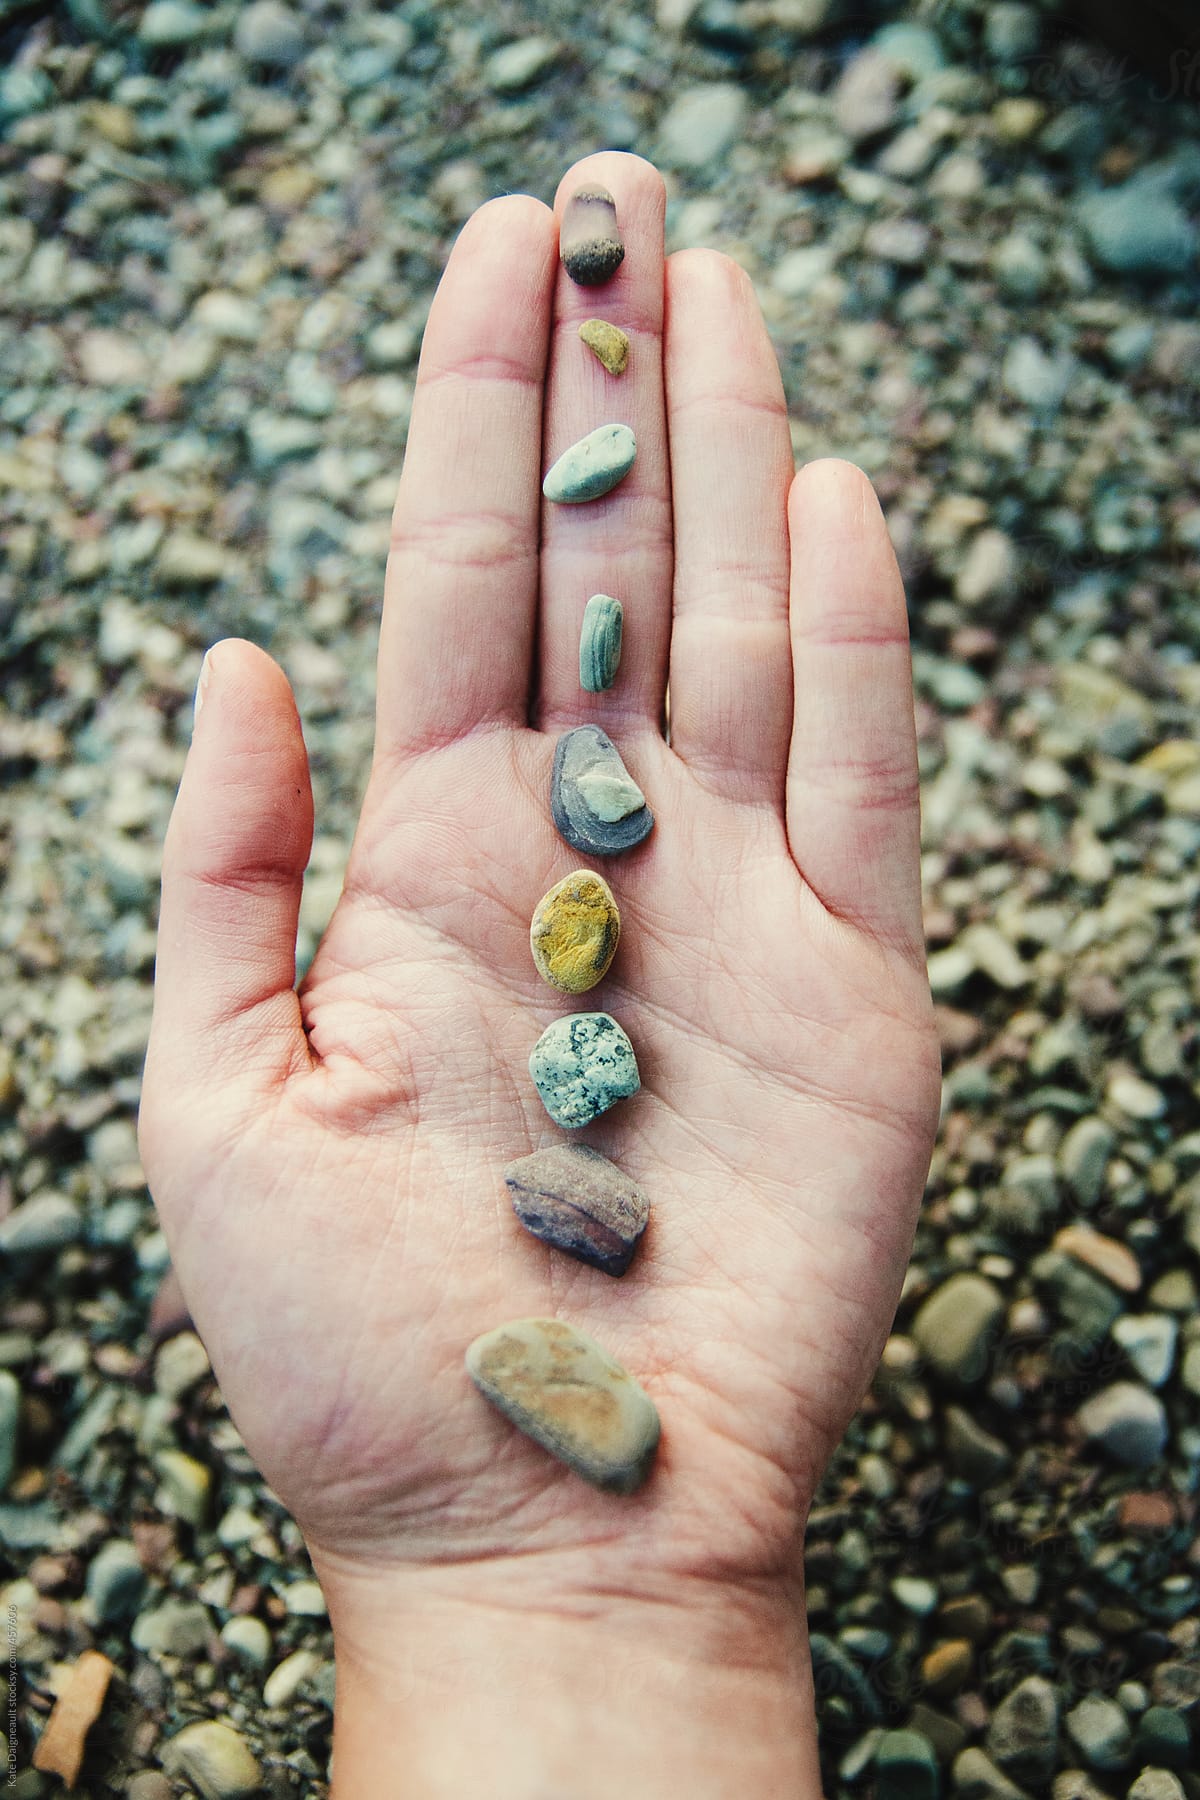 A row of colorful stones carefully aligned on a hand